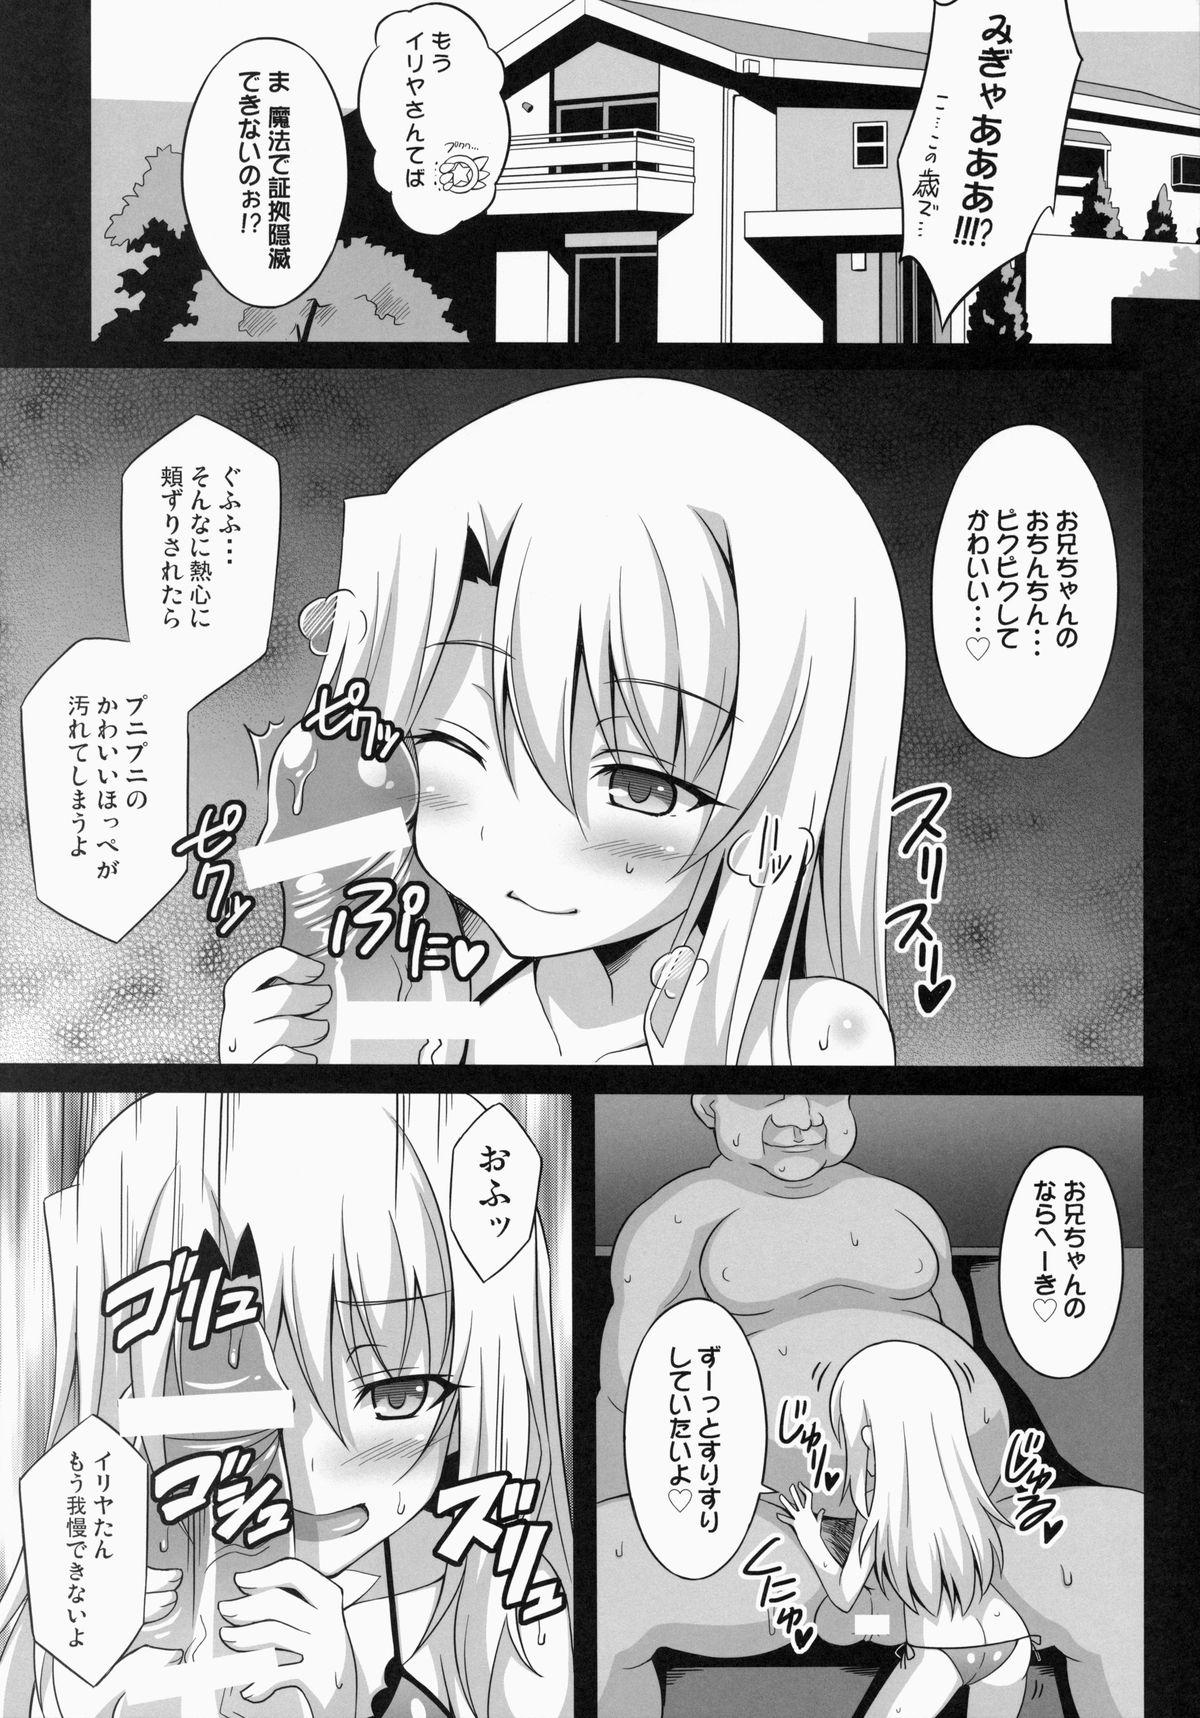 Swedish Datenshi XX EPISODE 1 - Fate kaleid liner prisma illya Old Young - Page 6